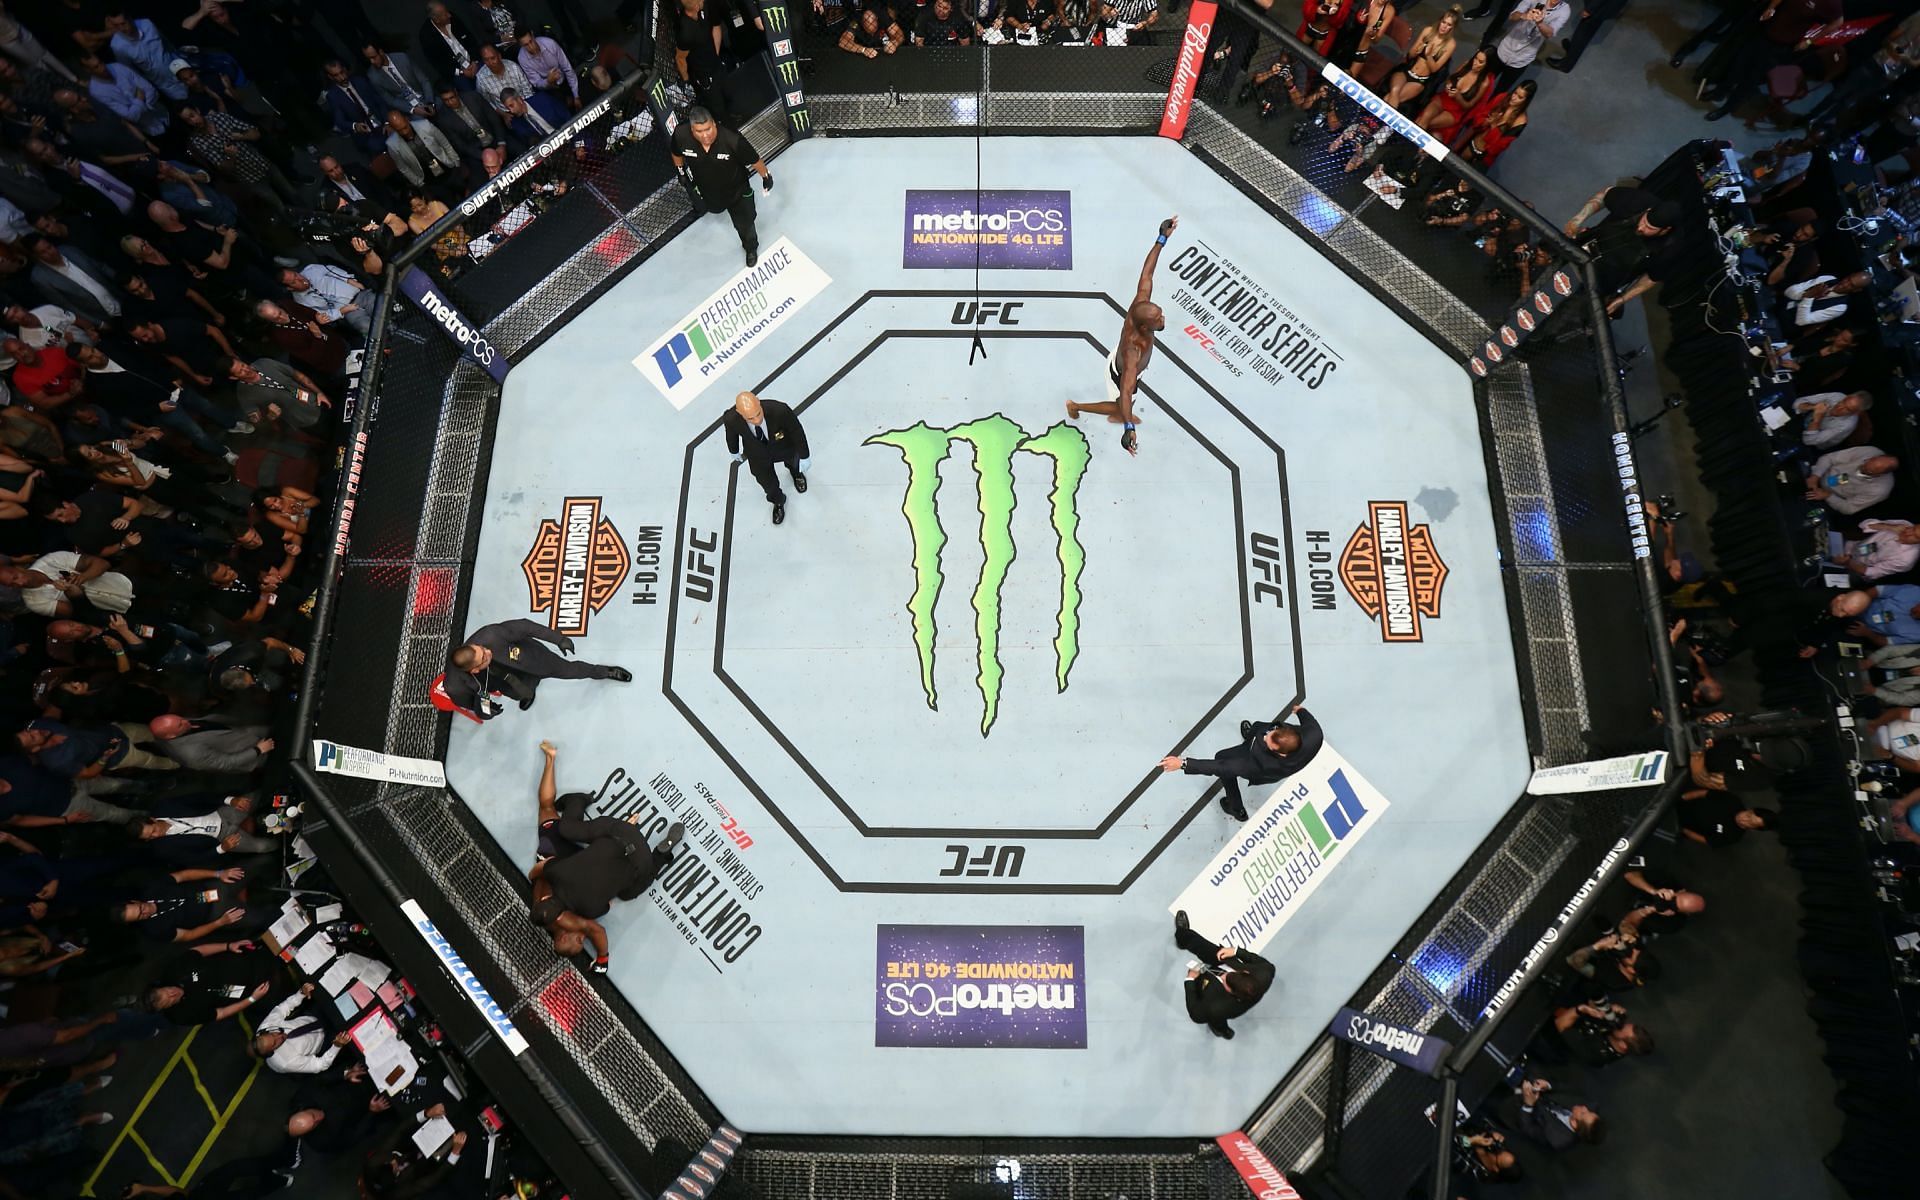 UFC octagon [Image credits: Getty Images ]